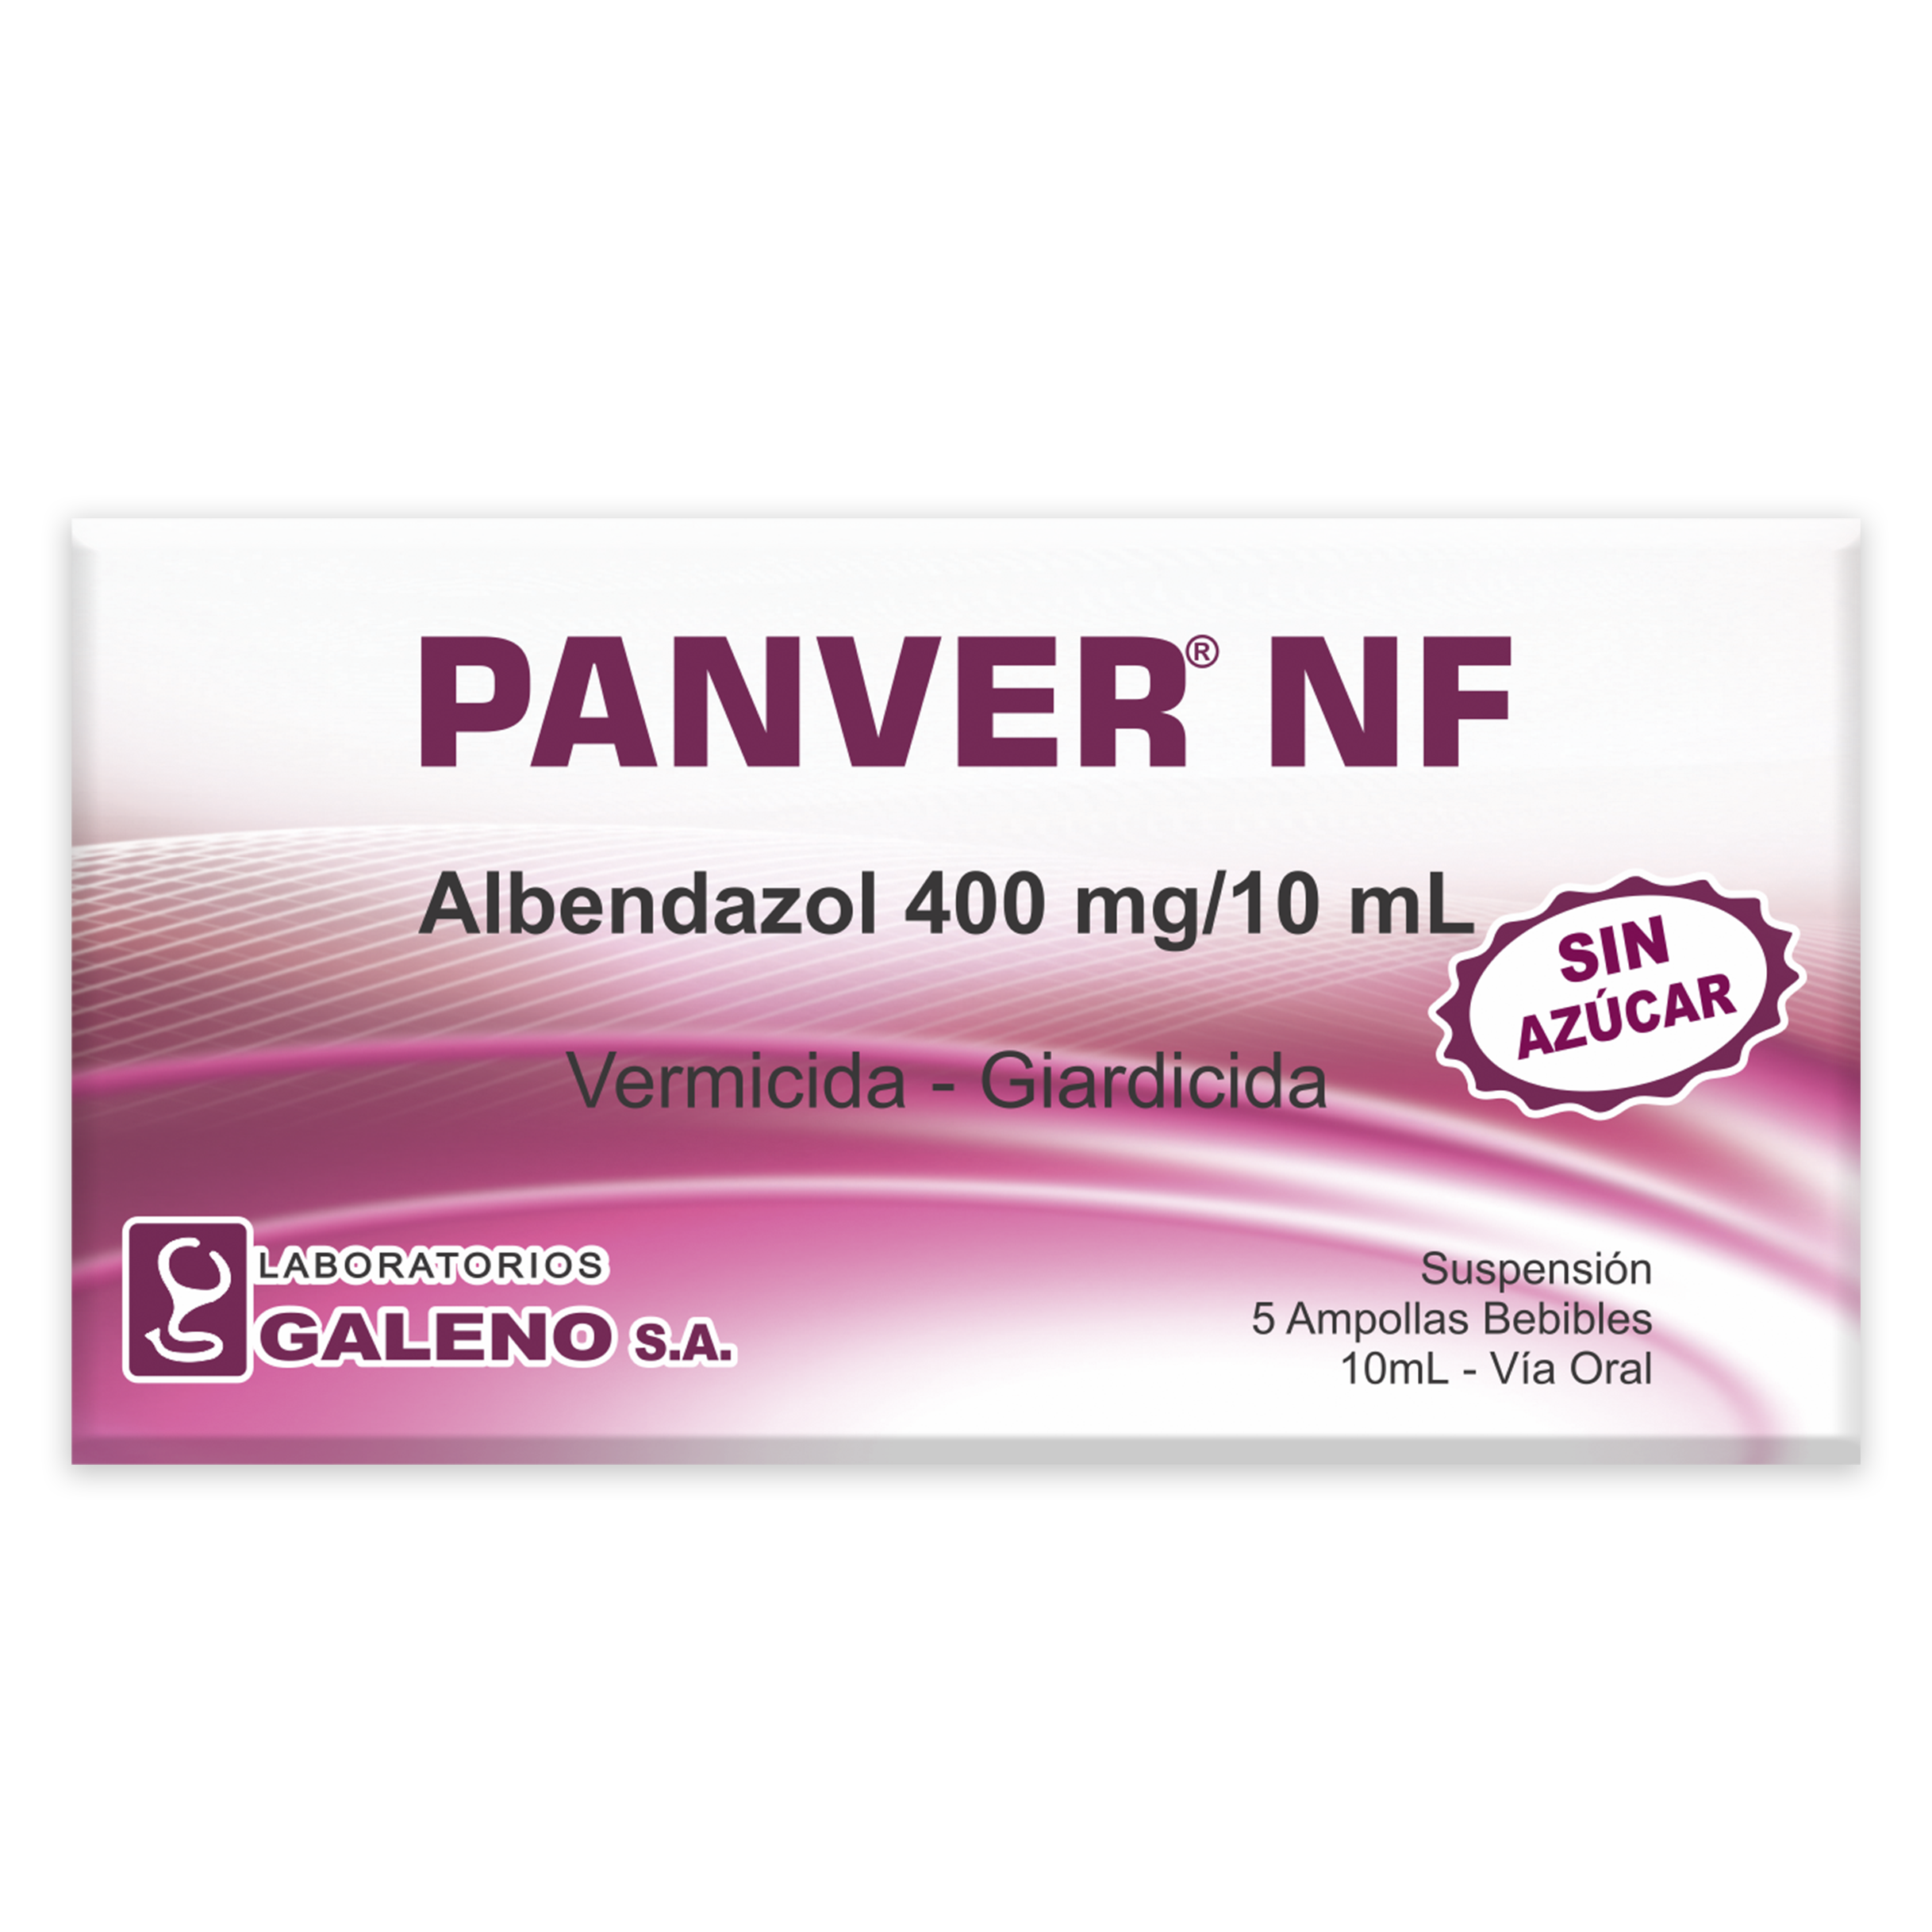 PANVER NF